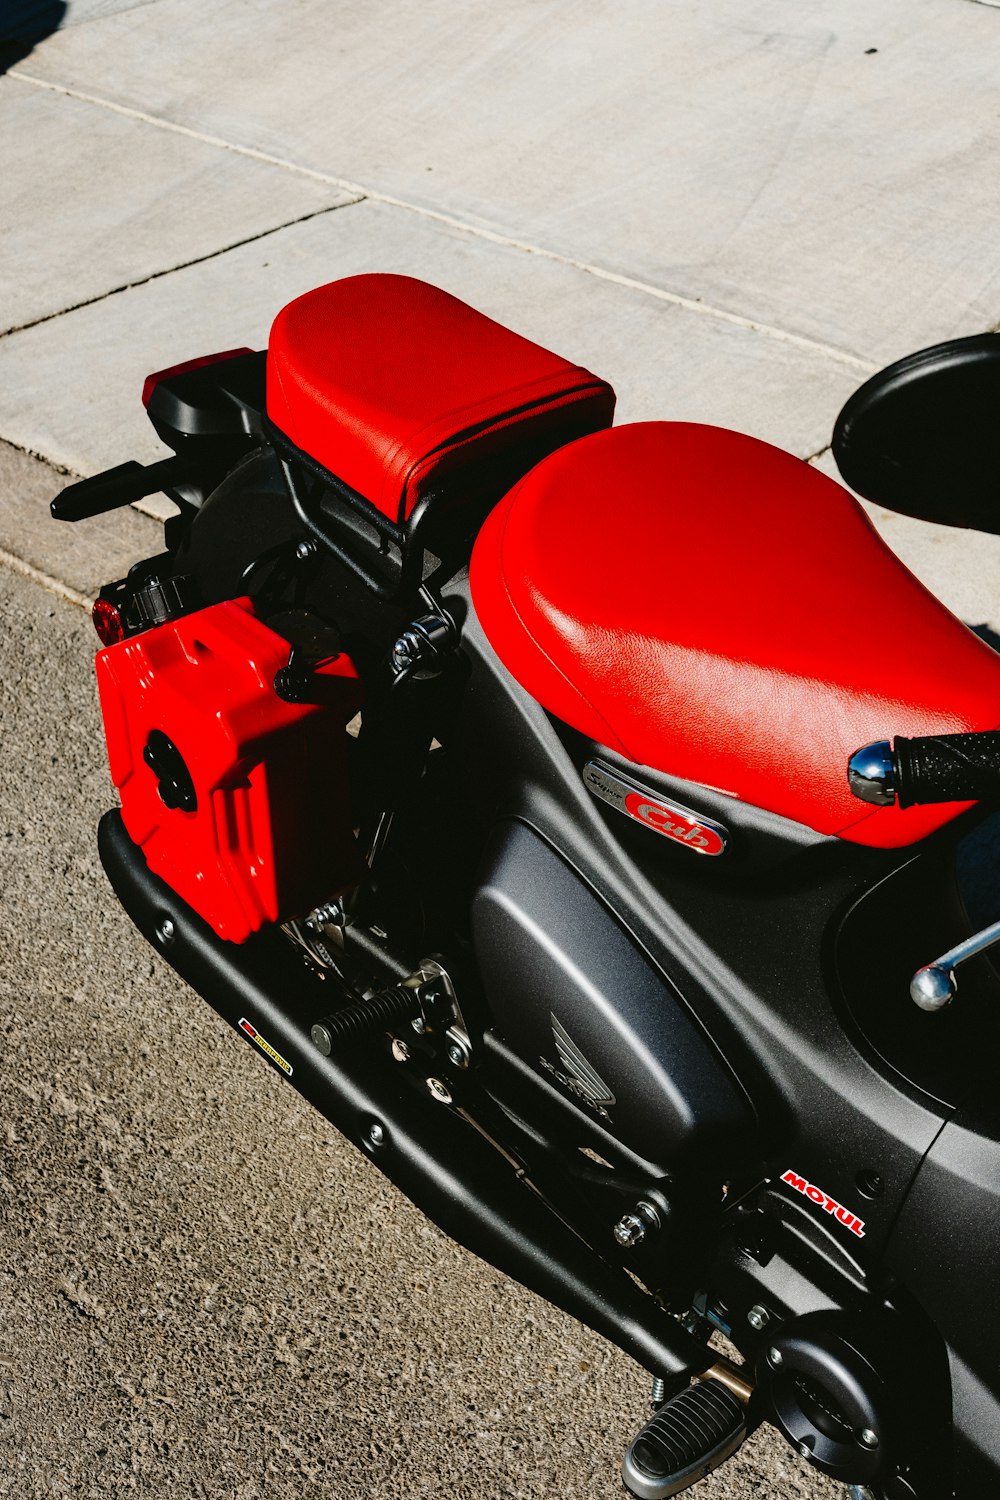 a red and black motorcycle parked on the street